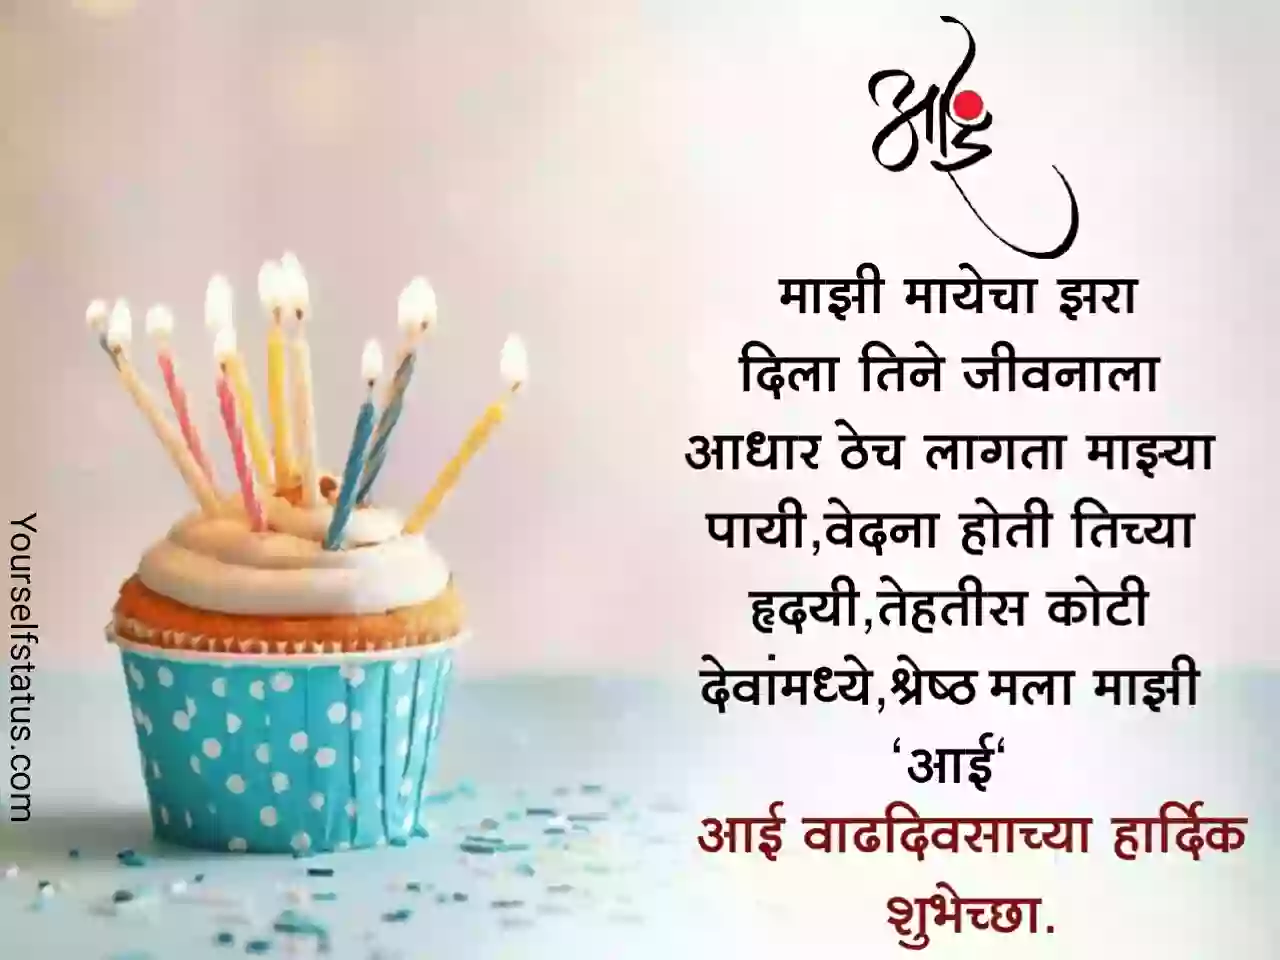 Birthday wishes for mother in marathi